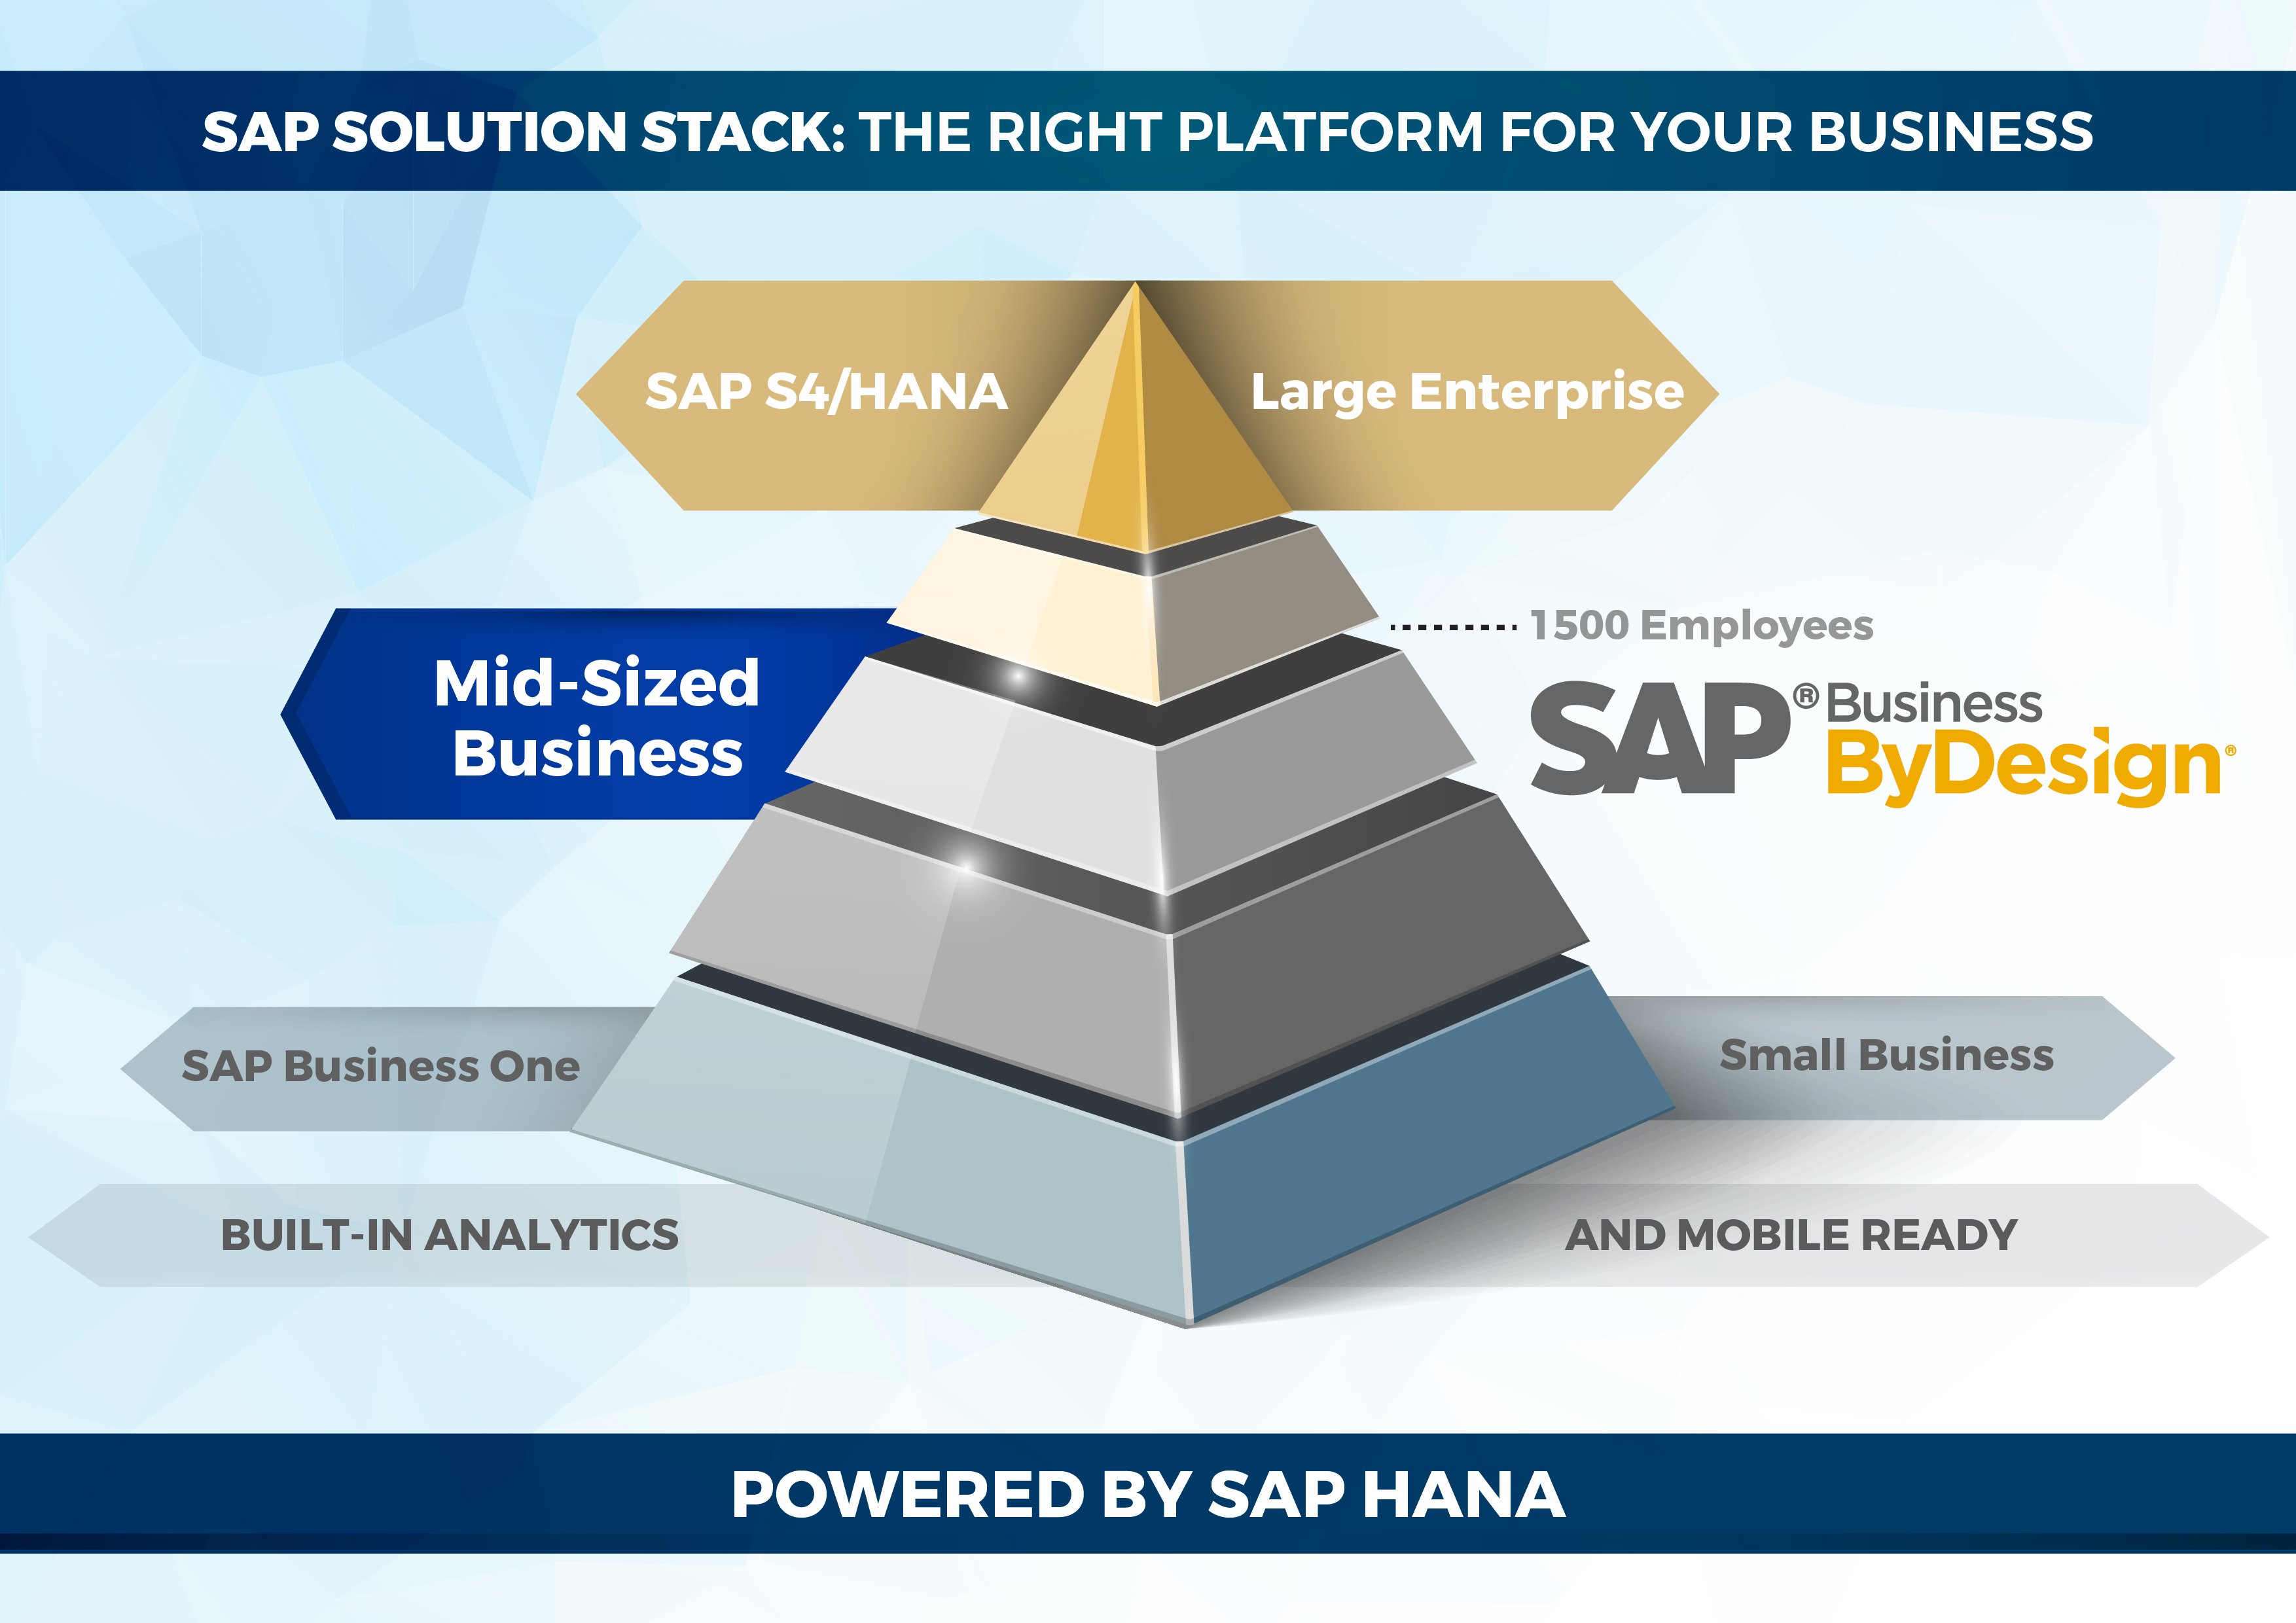 SAP for Small Business: SAP Business One Software